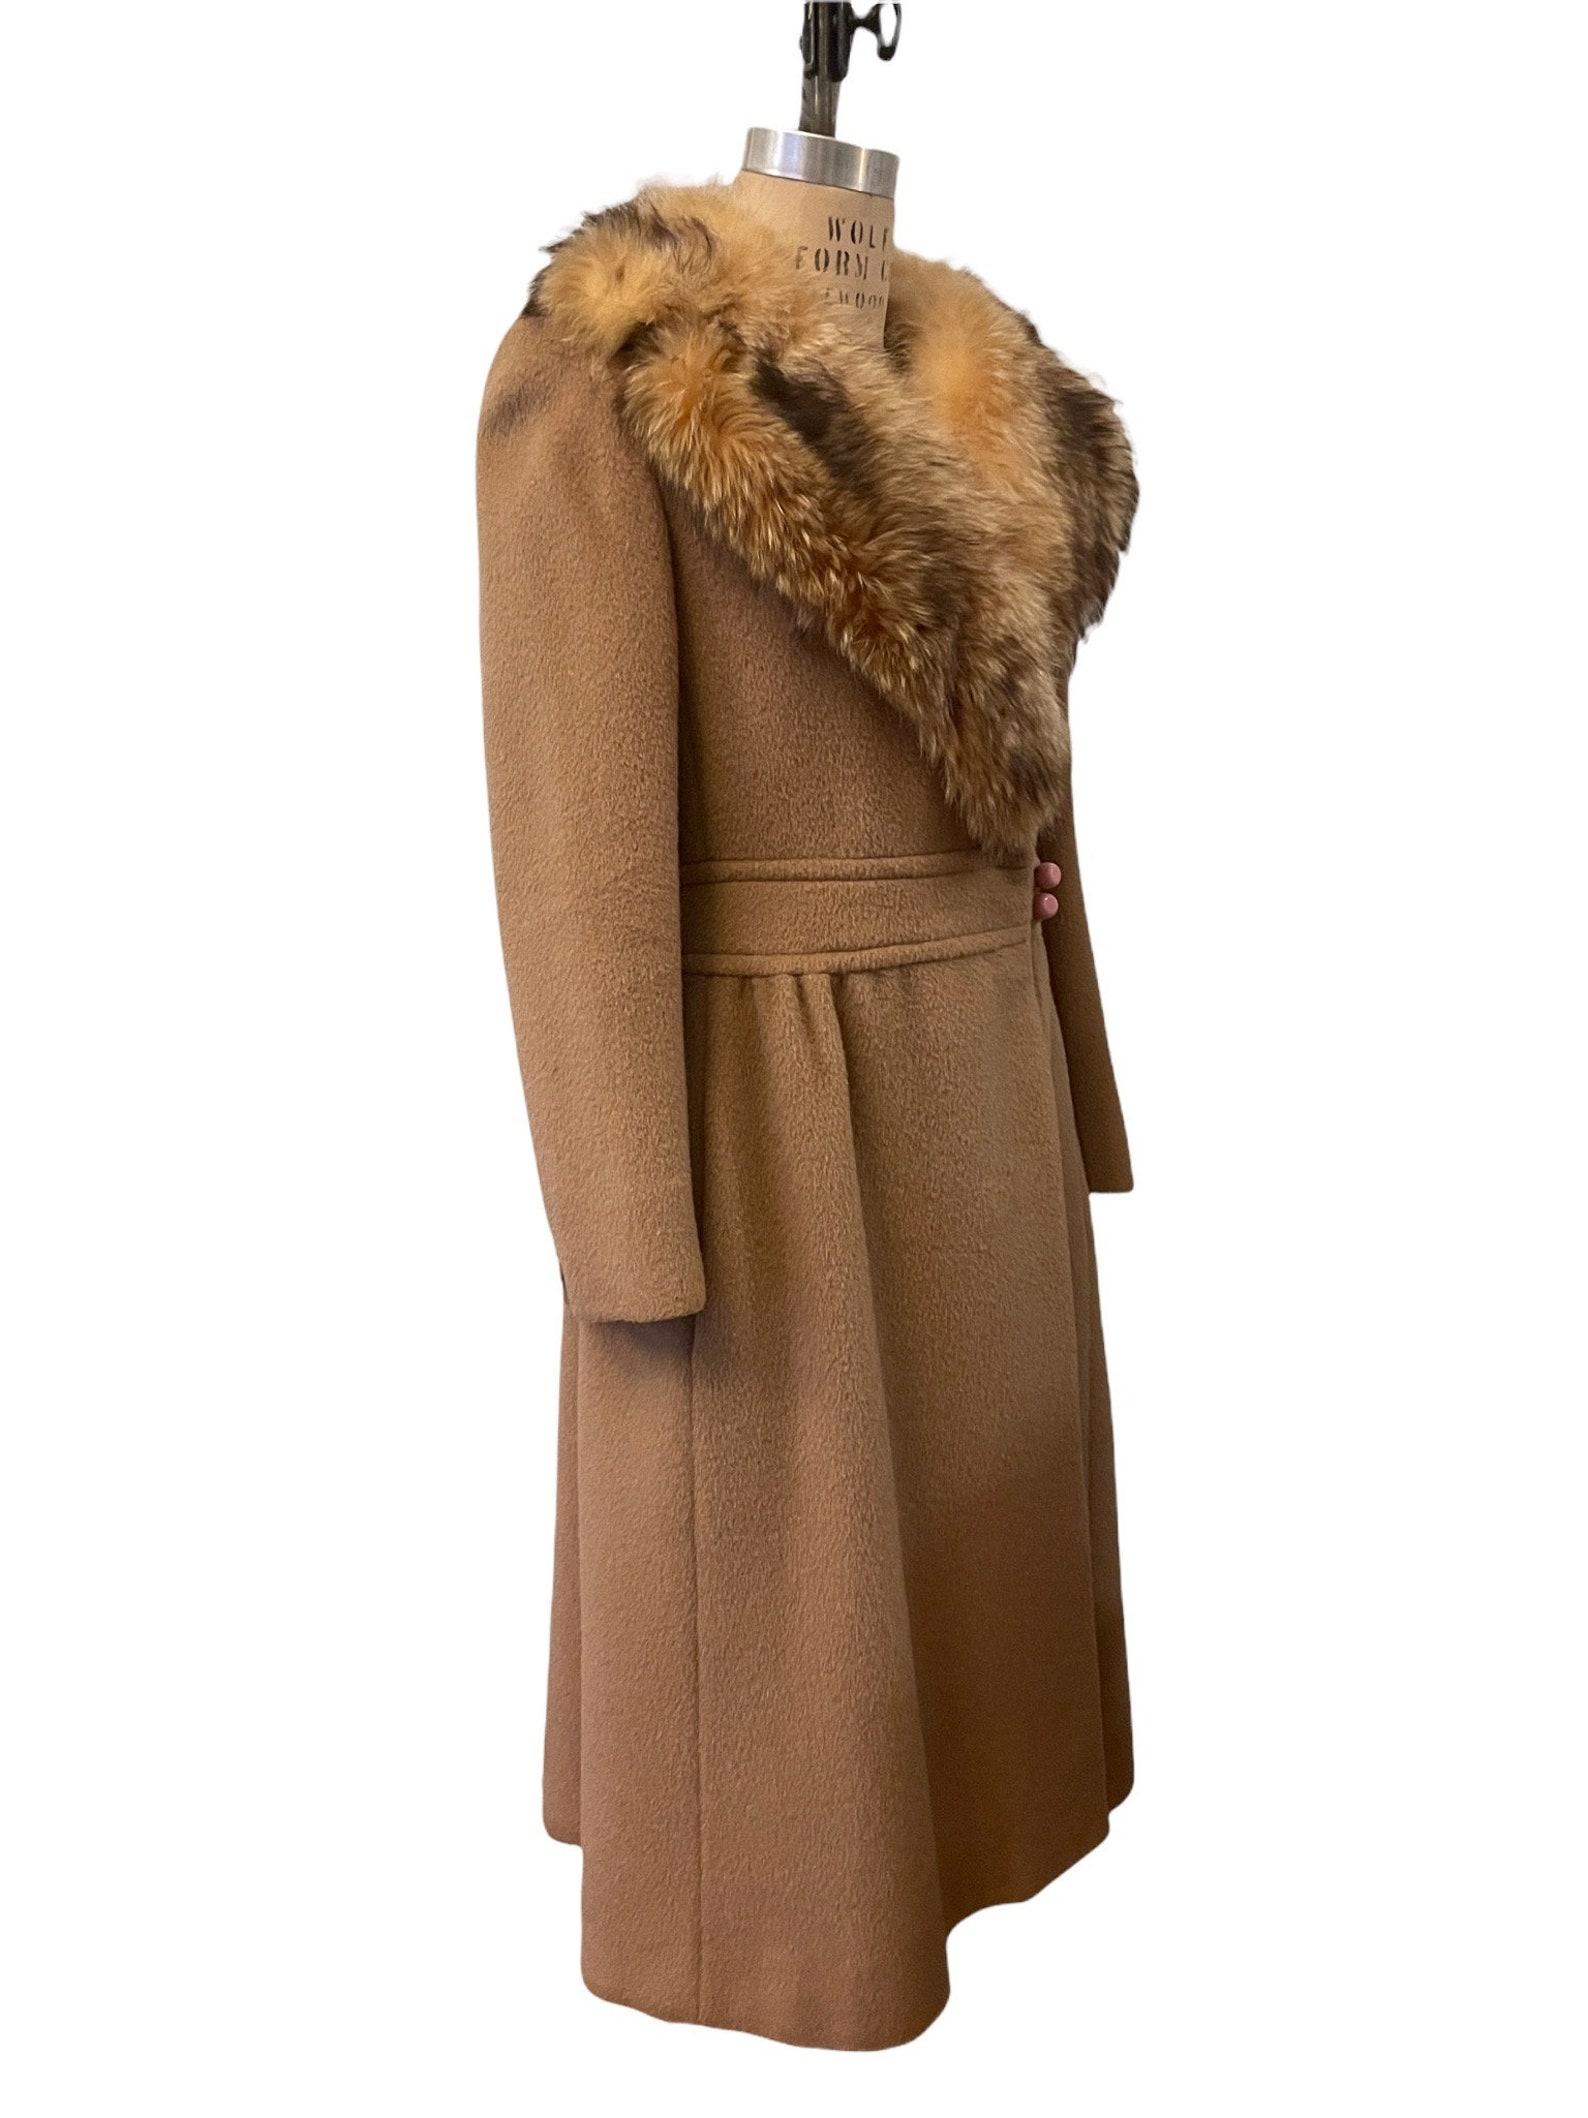 Pierre Cardin Wool Princess Coat with Fox Fur Collar, Circa 1970s In Excellent Condition For Sale In Brooklyn, NY